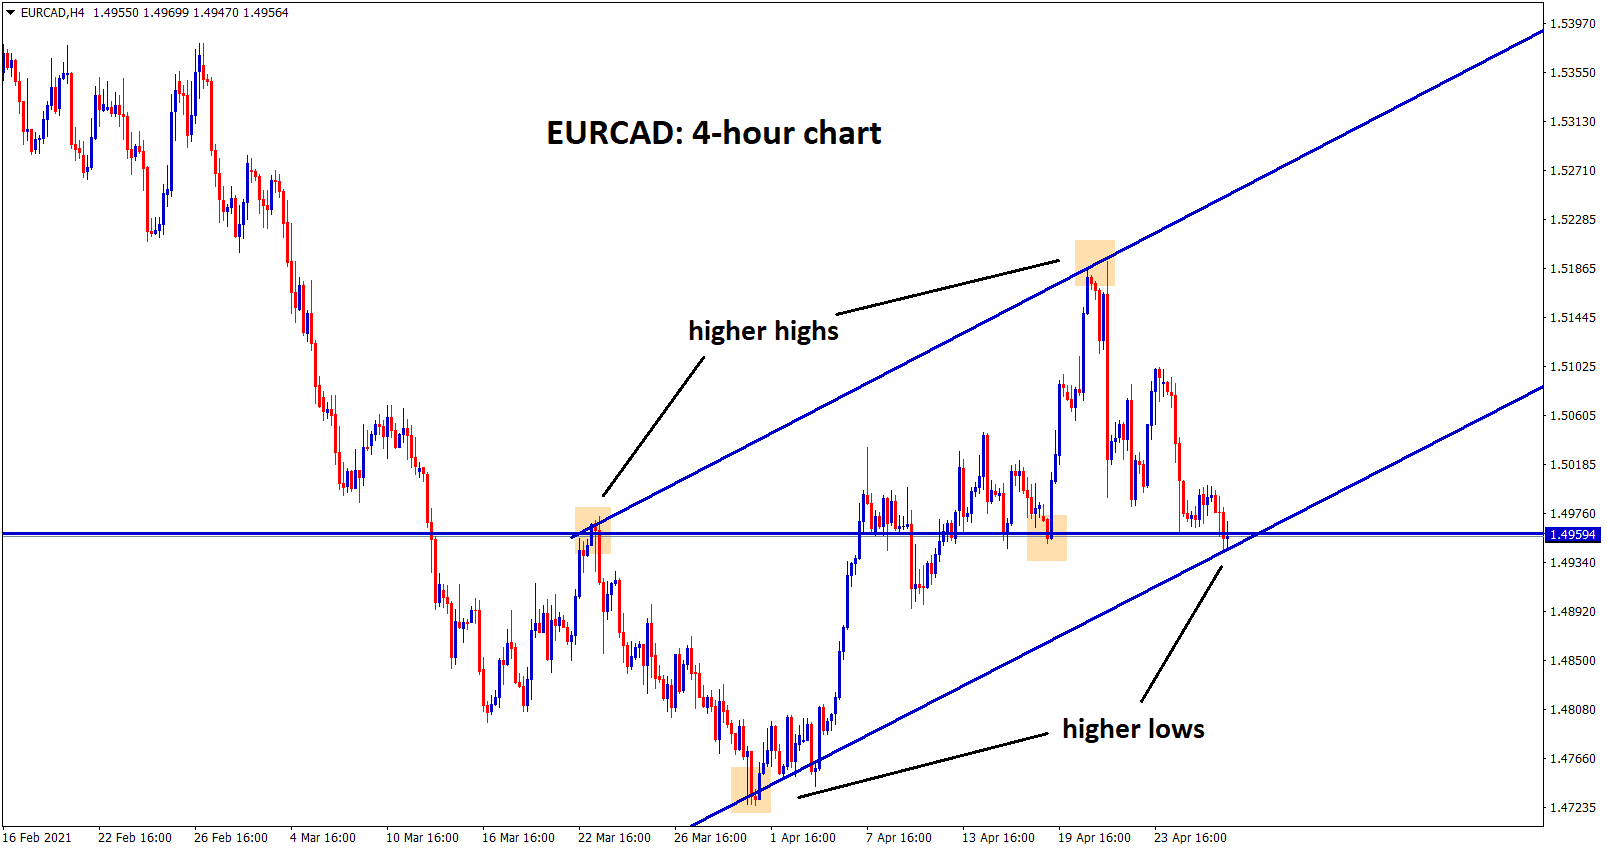 EURCAD at the higher low zone of an uptrend line in h4